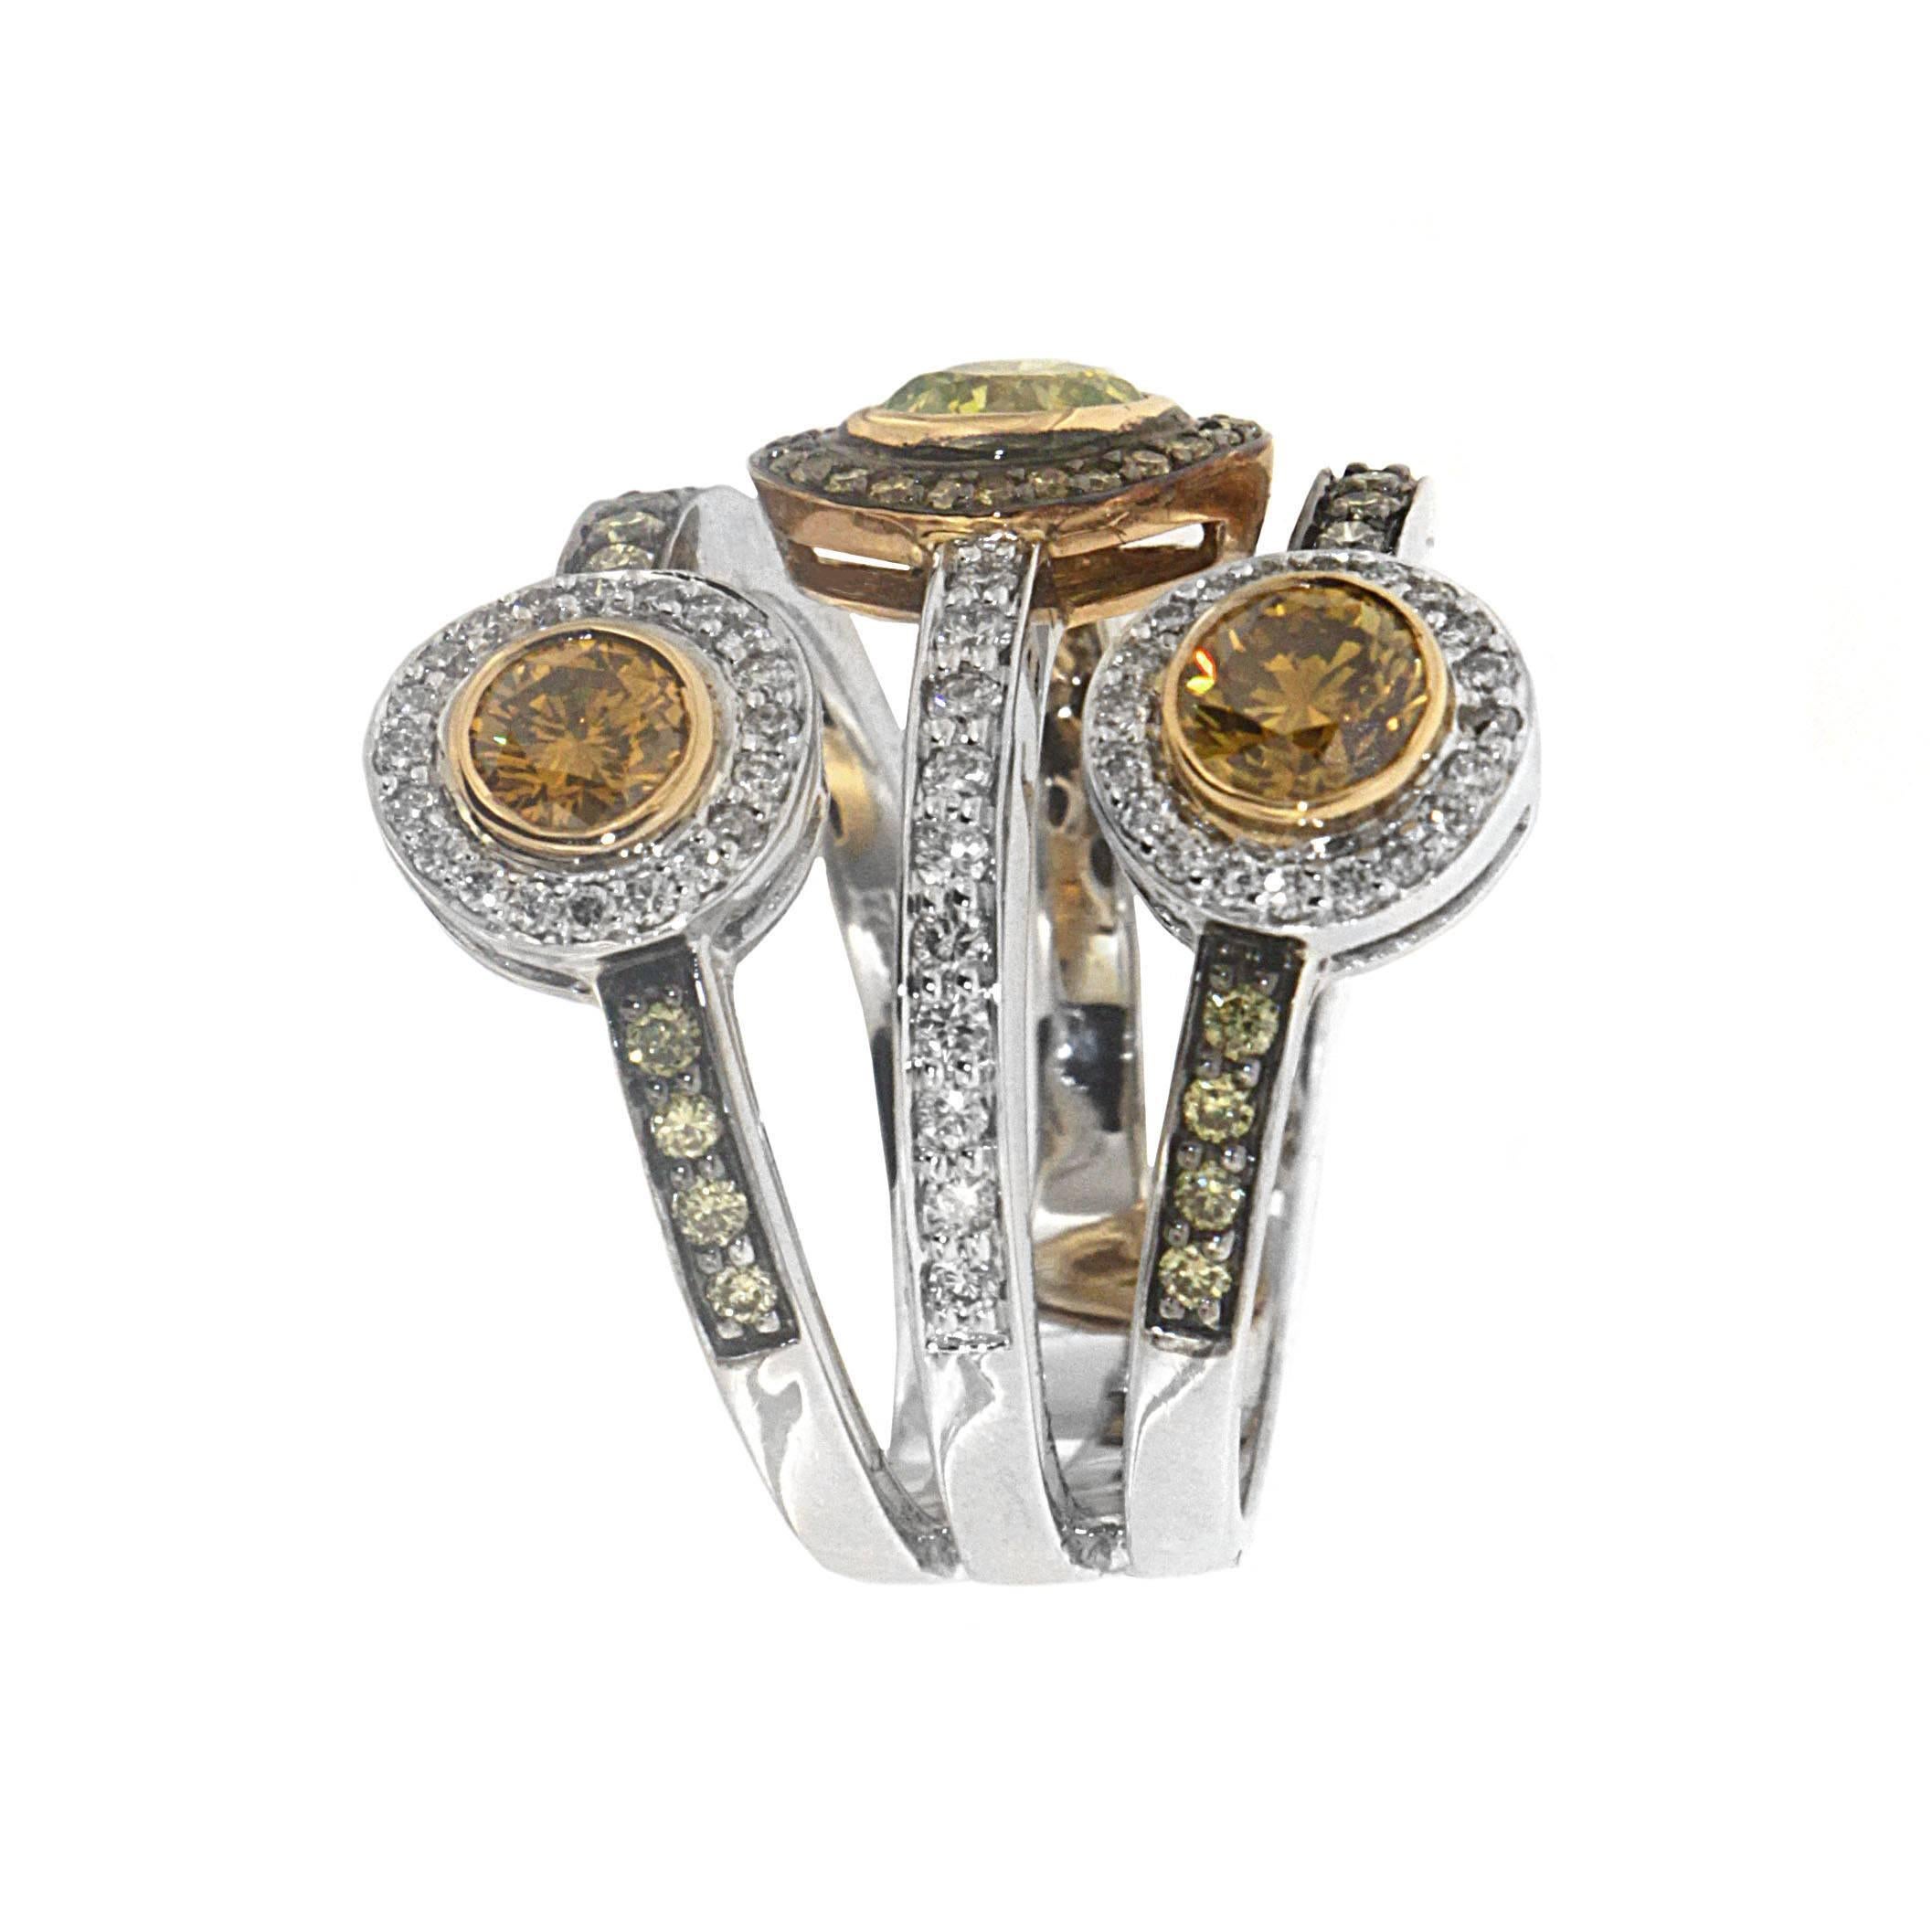 Zorab's distinctive ring depicting a set of three separate bands joined at the base create a superb trinity. Each band features a center stone ( 1.52 carats of Fancy Diamond and 1/35 carats of Yellow Sapphires). This uncommon halo ring with a